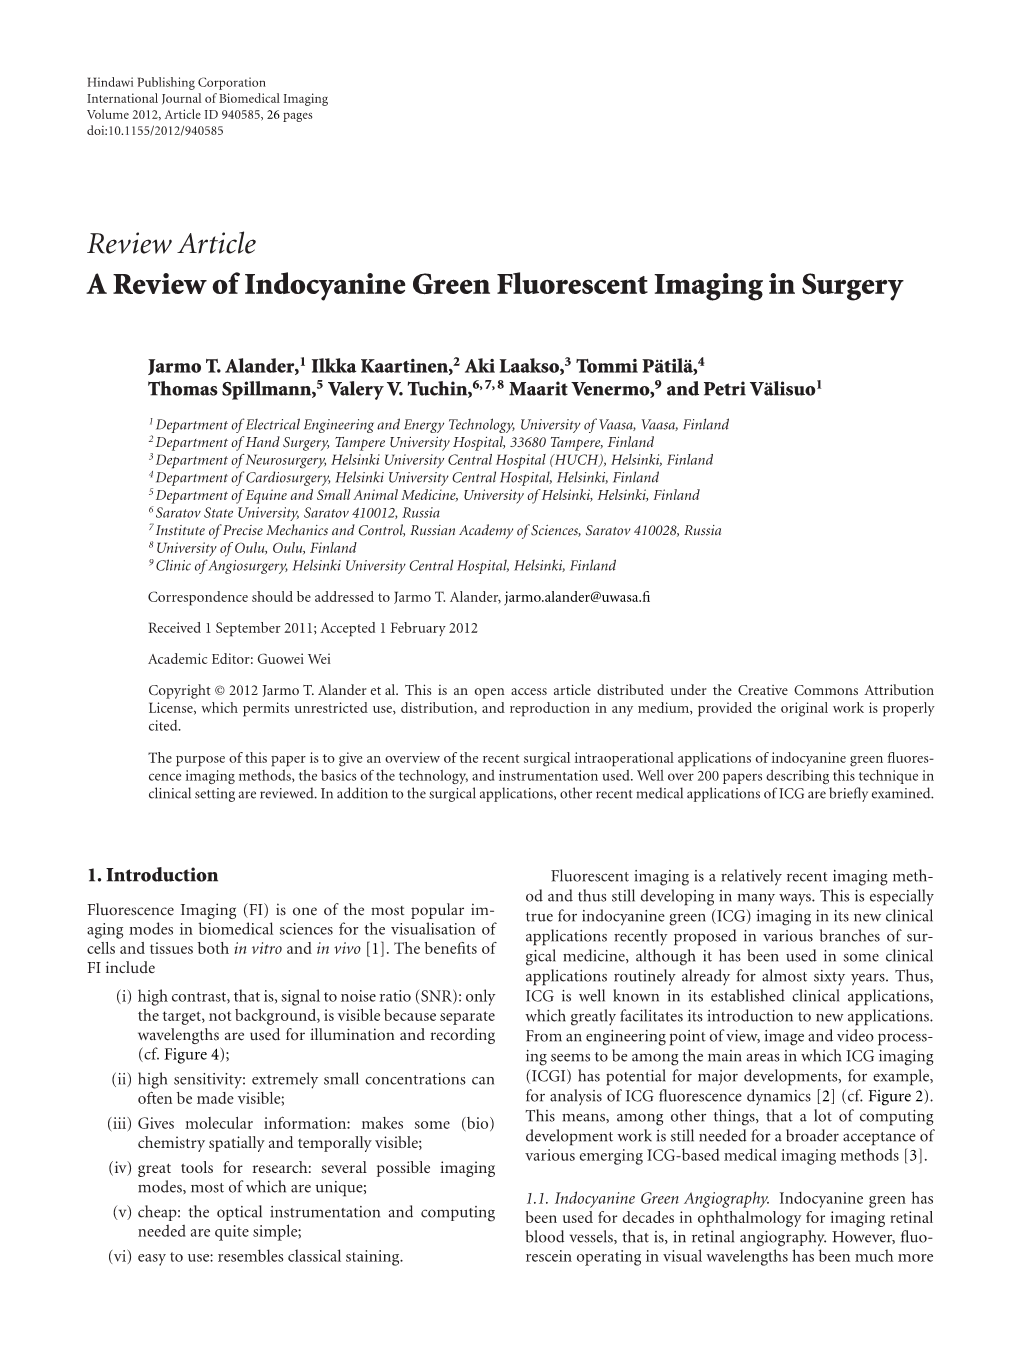 A Review of Indocyanine Green Fluorescent Imaging in Surgery